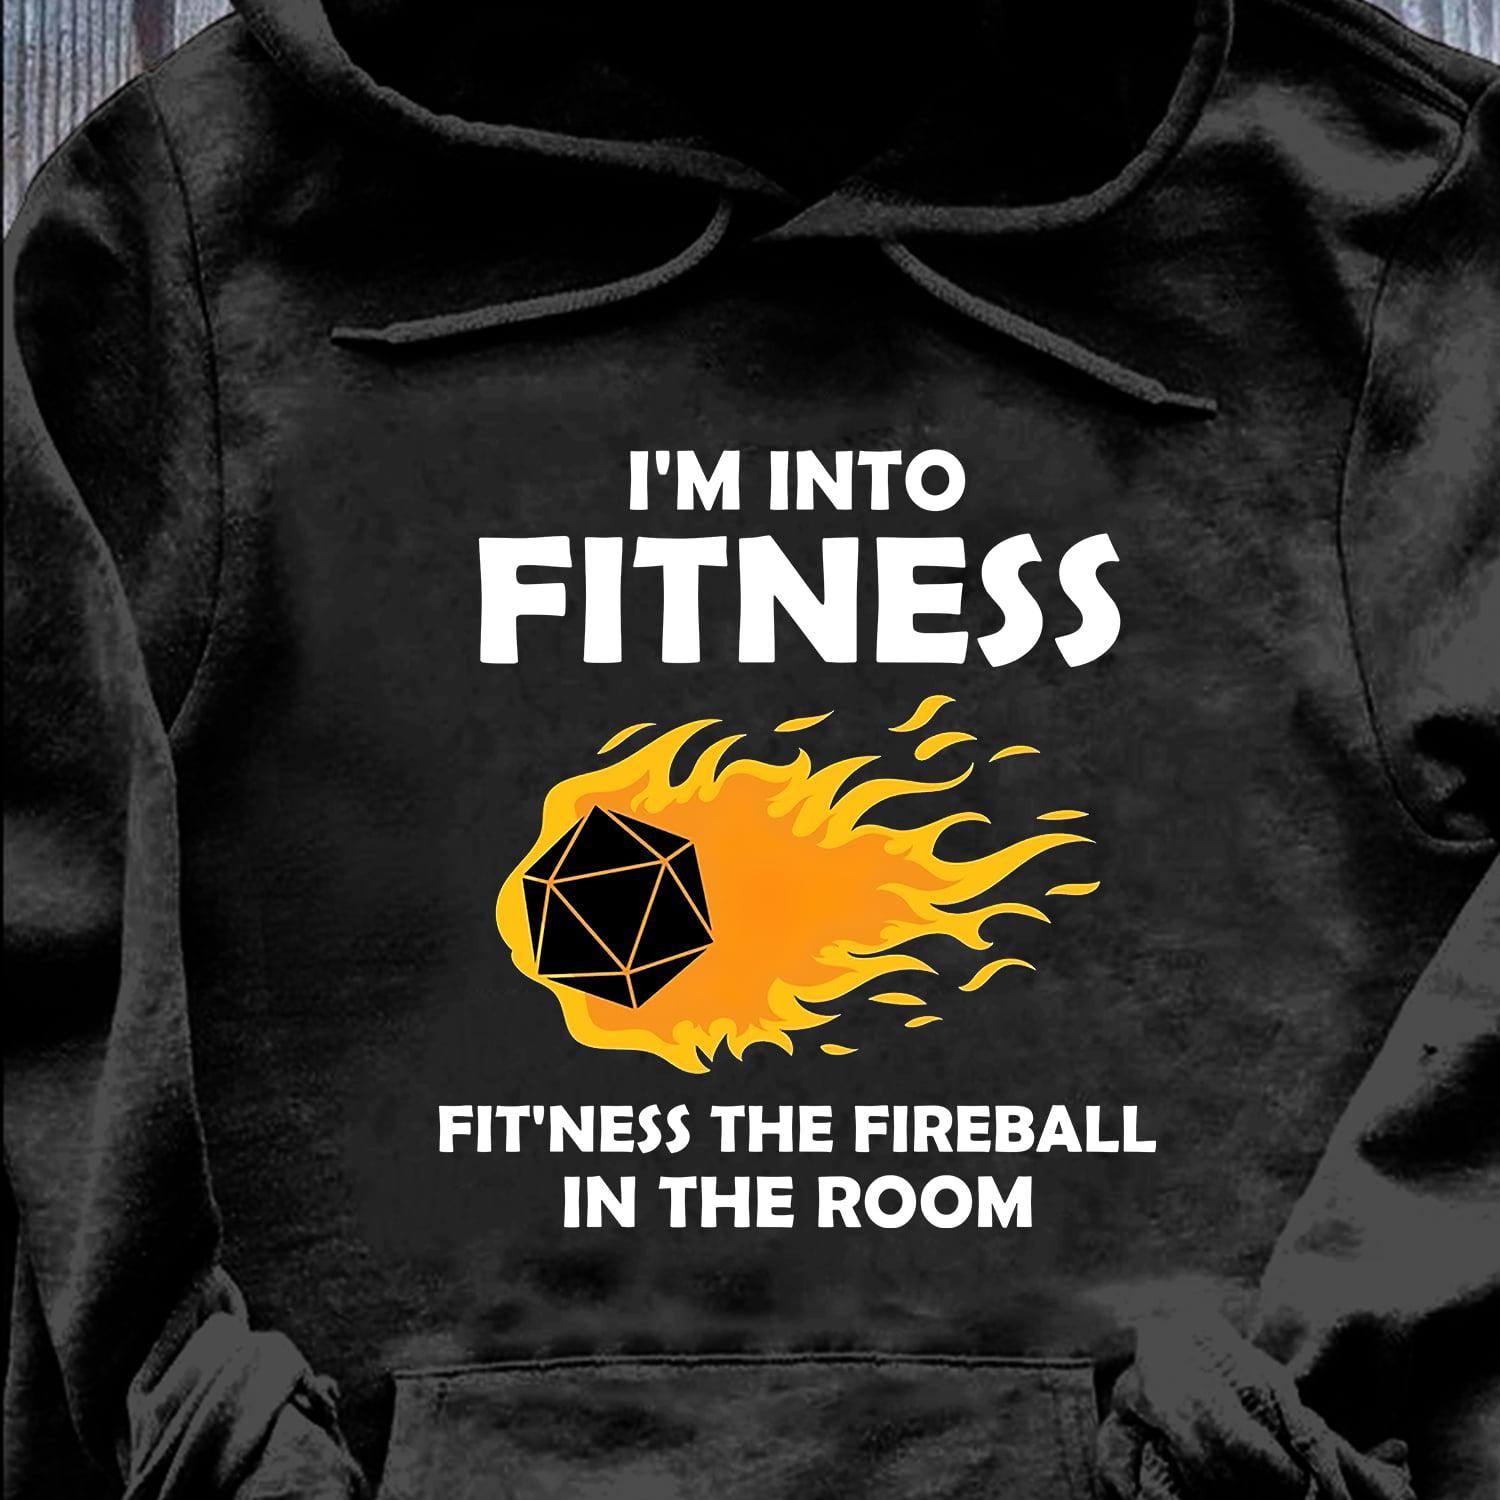 I'm into fitness fit'nes the fireball in the room - Dungeons and Dragons